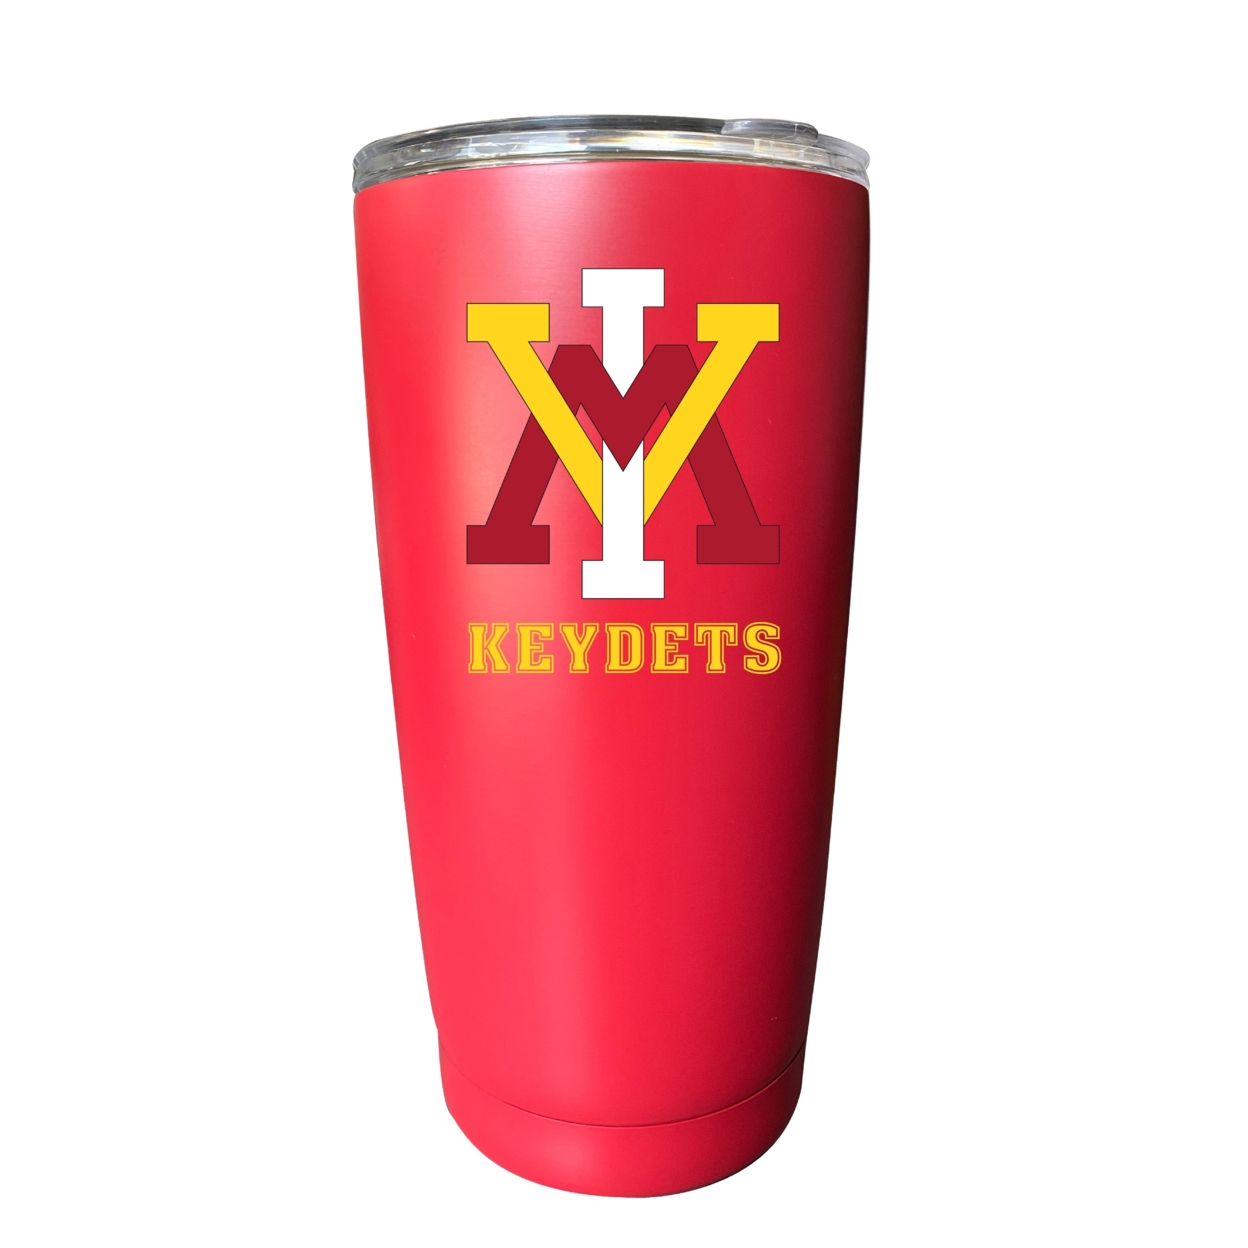 VMI Keydets 16 Oz Insulated Stainless Steel Tumbler - Choose Your Color. - Red